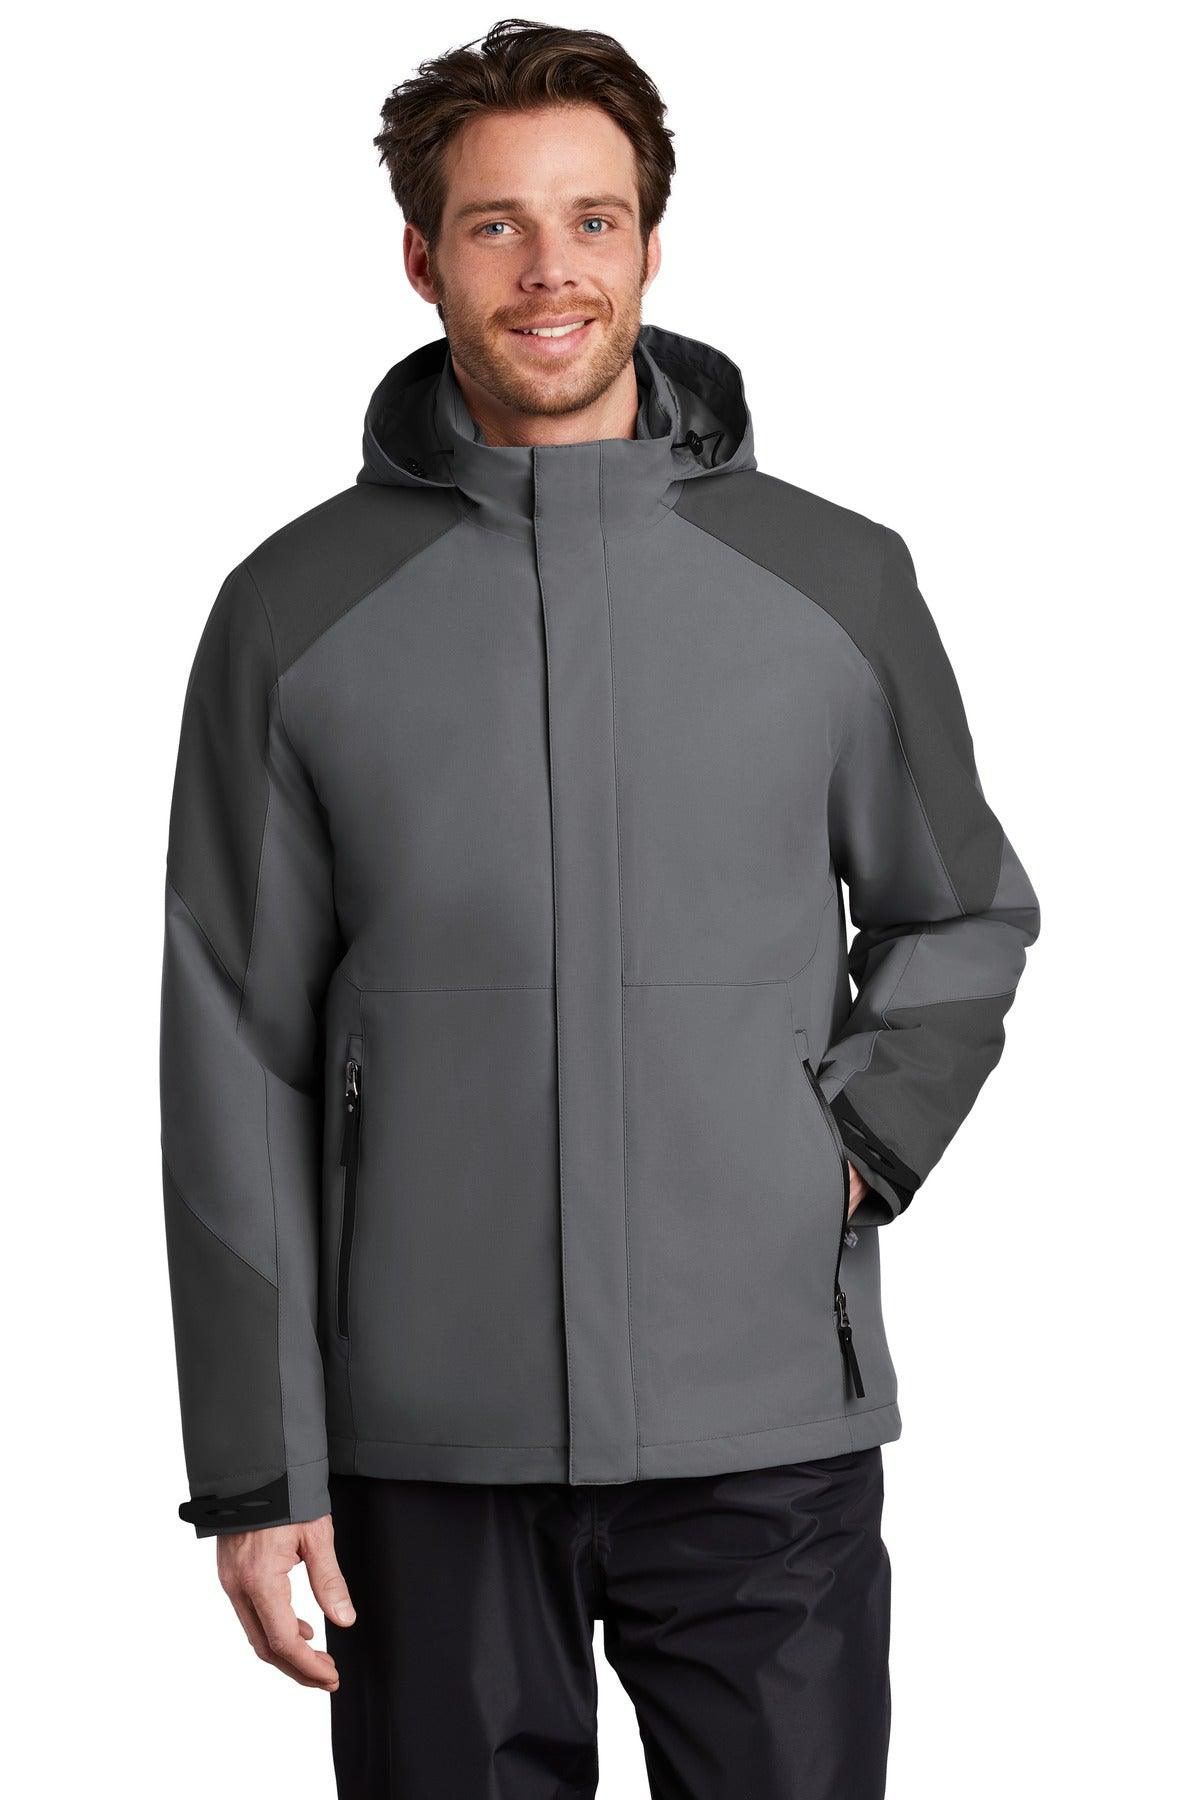 Port Authority Insulated Waterproof Tech Jacket J405 - Dresses Max